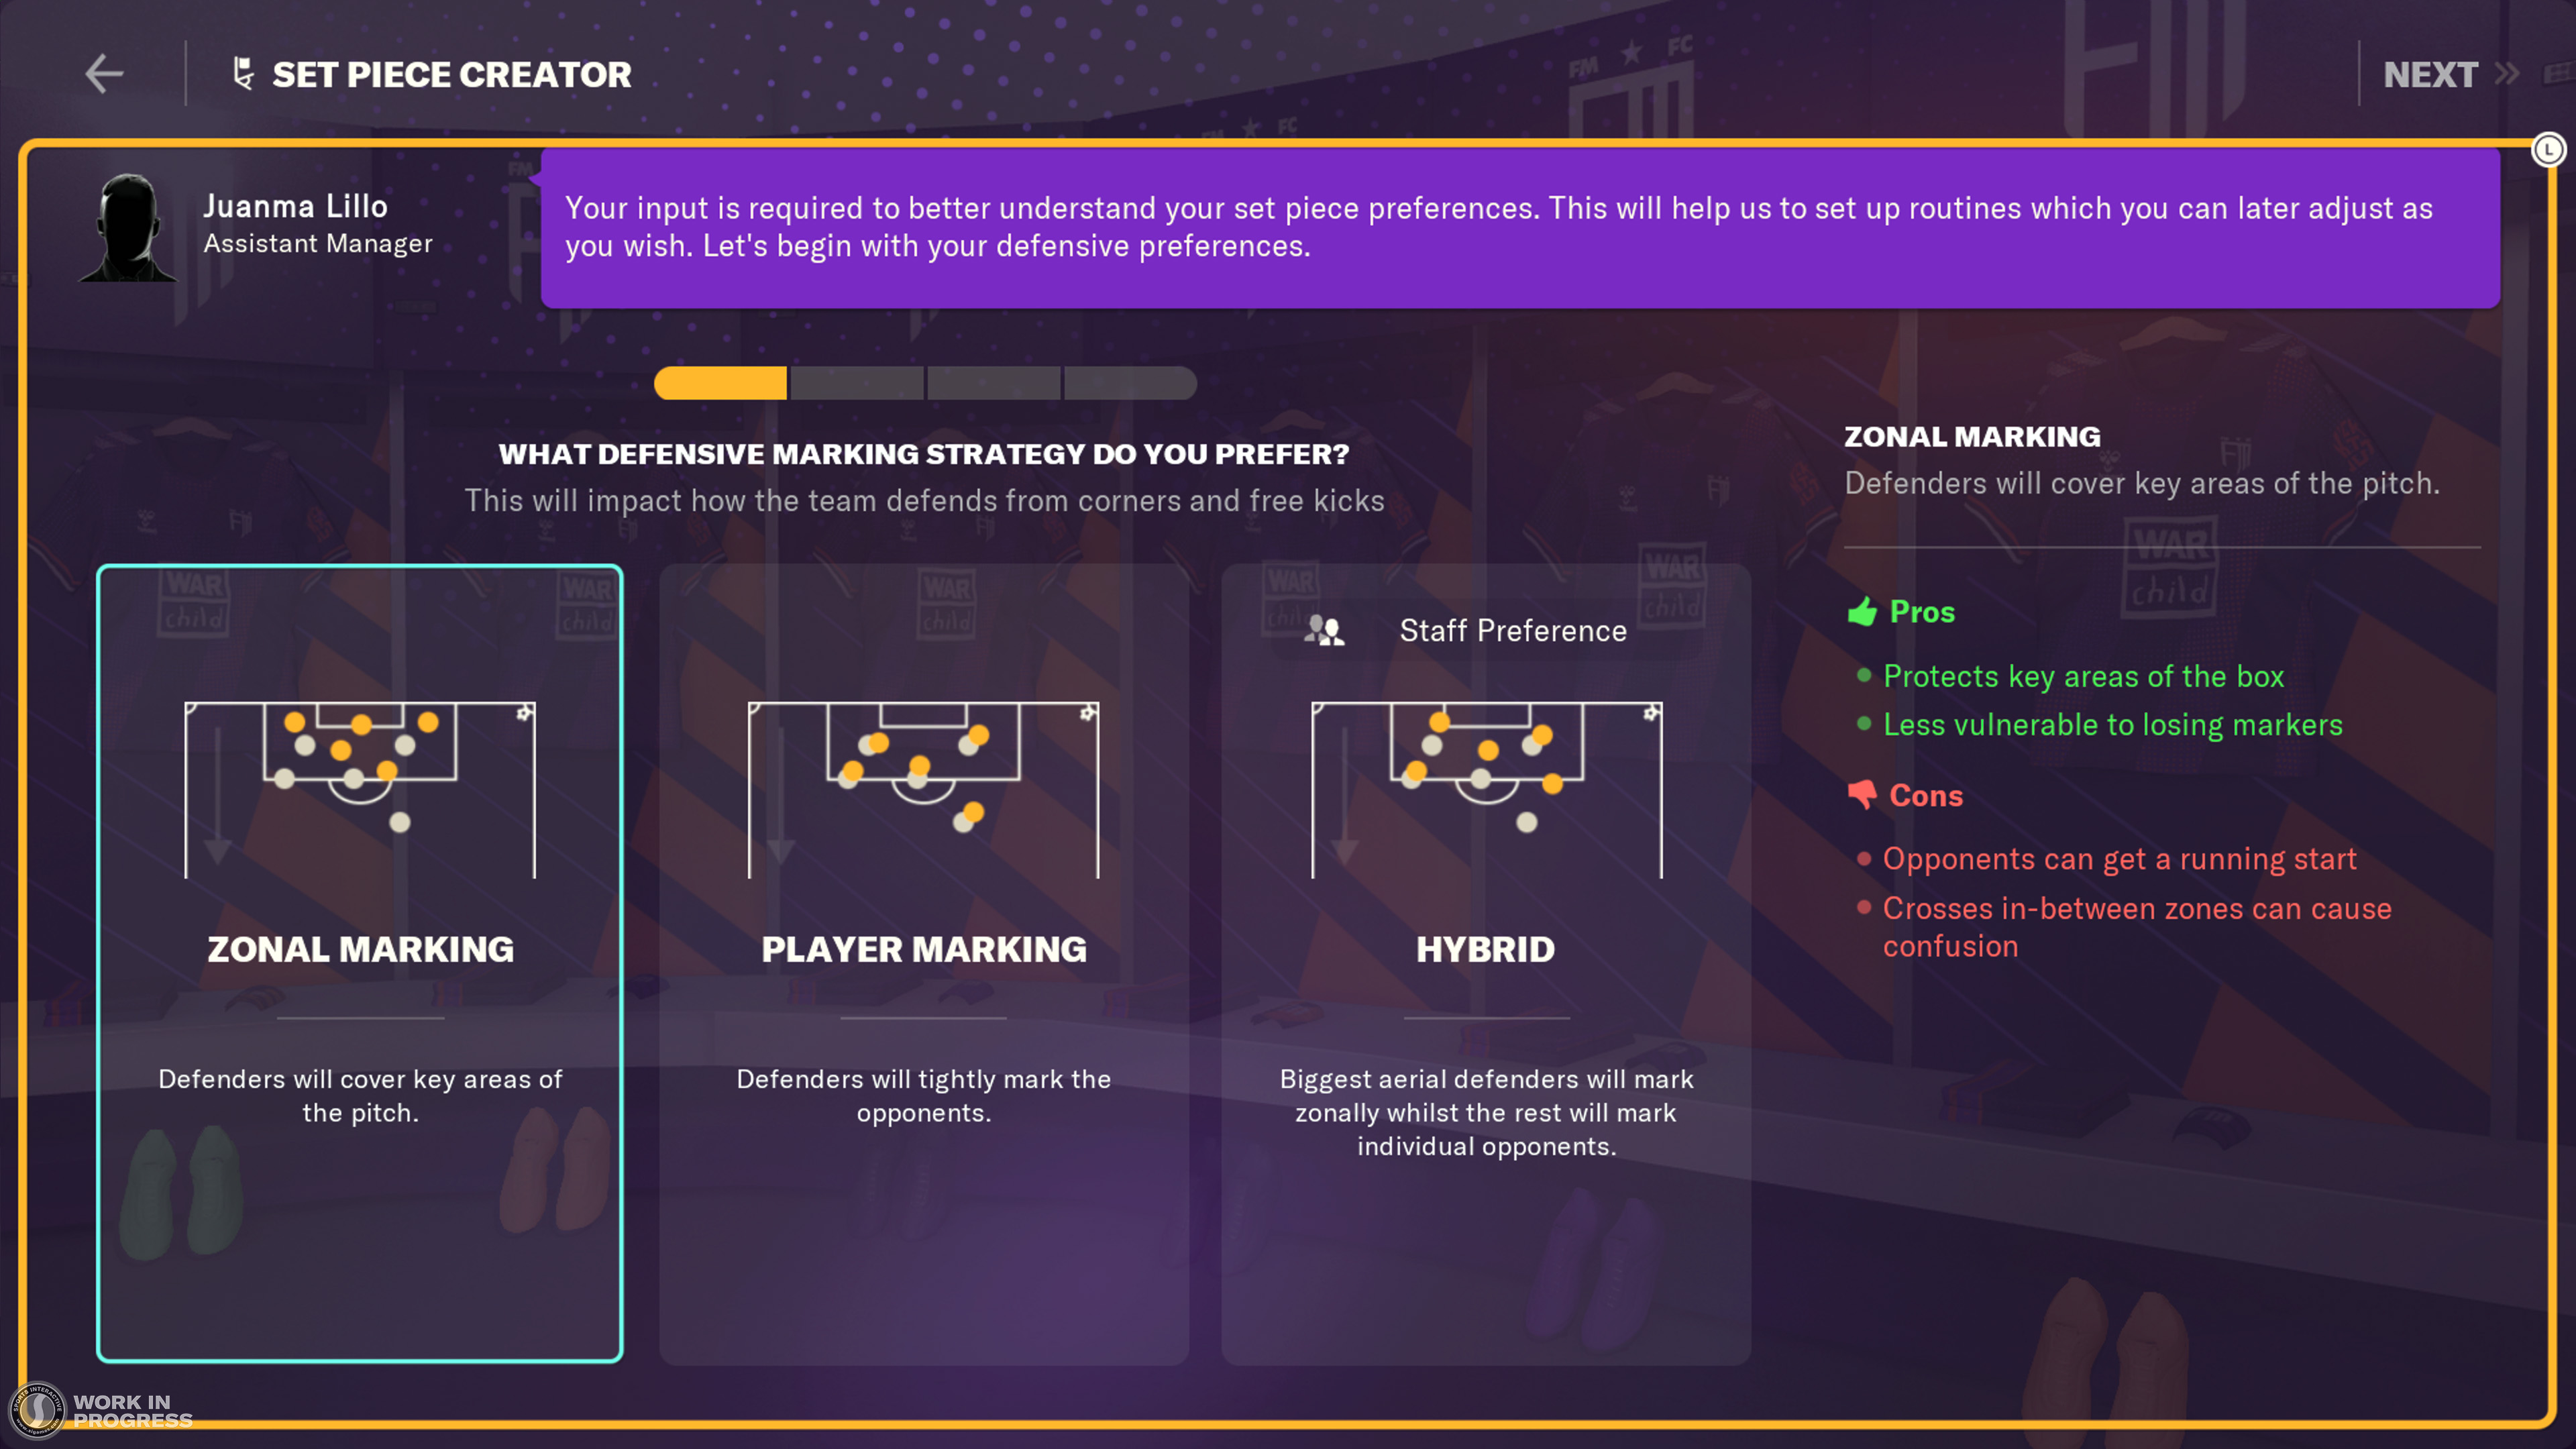 FM24 Youth Development Guide - Mentoring and Training Wonderkids - General  Discussion - FM24 - Football Manager 2024